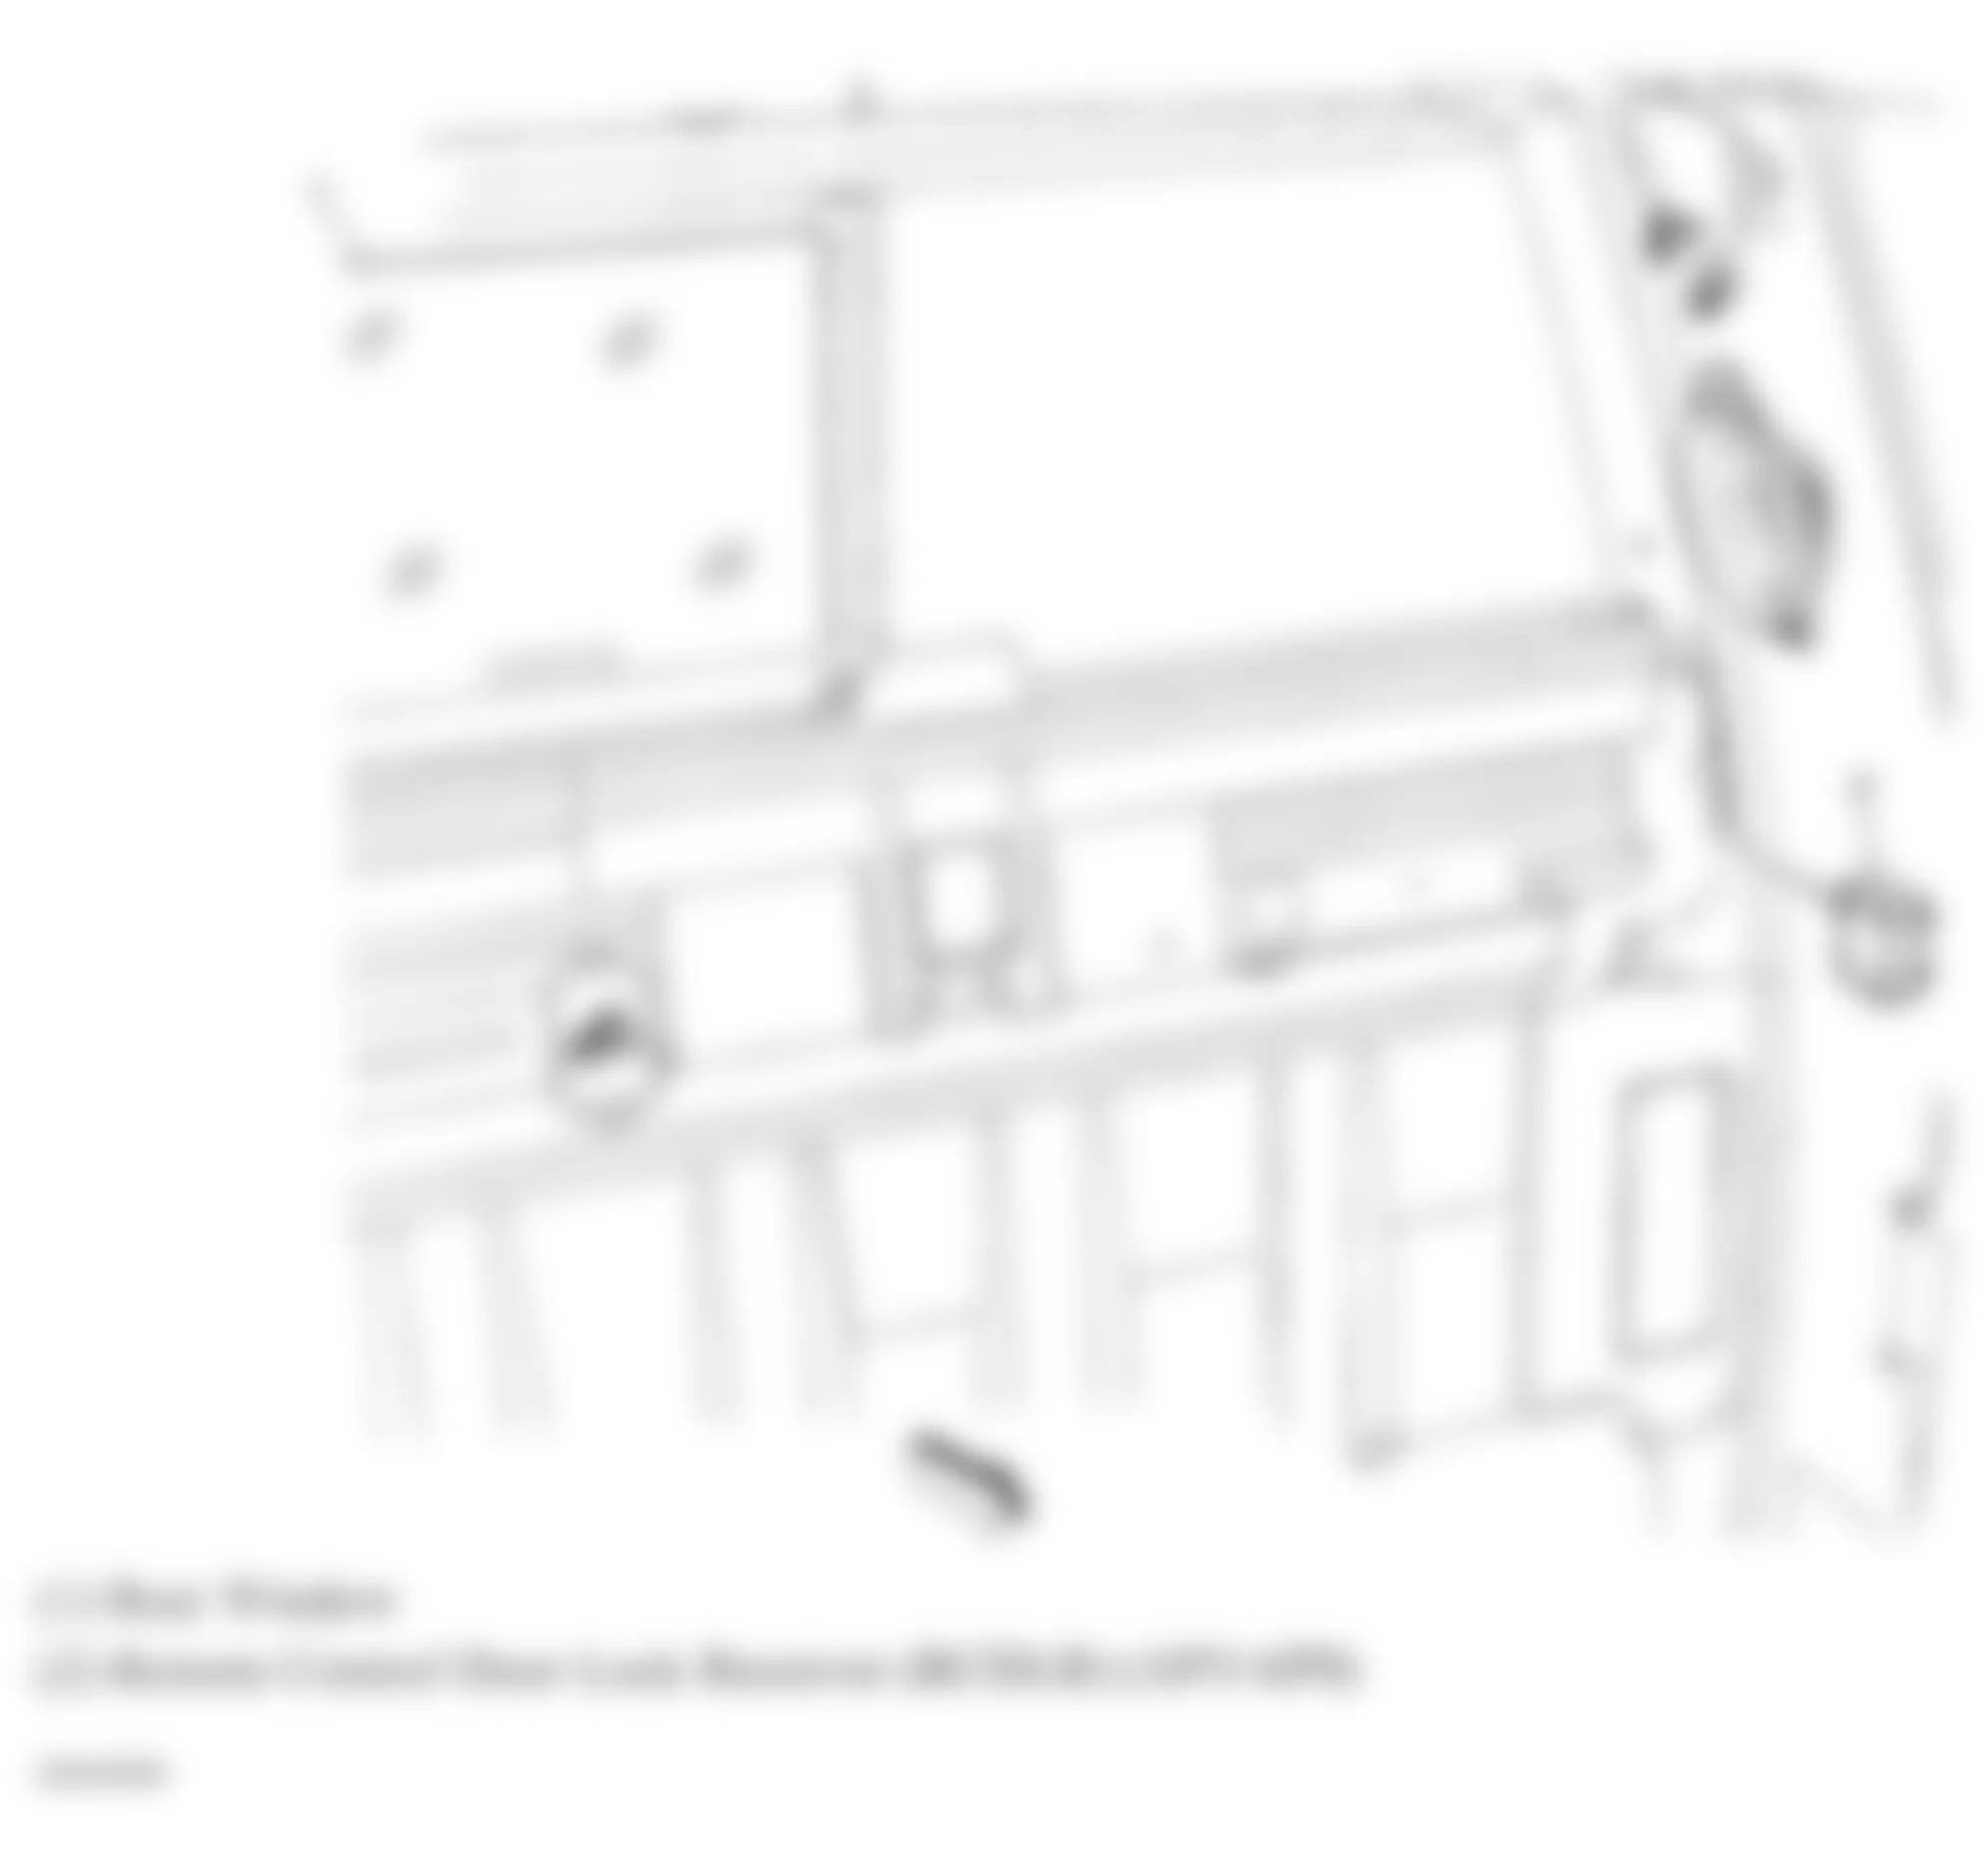 GMC Sierra 3500 HD 2009 - Component Locations -  Left Rear Of Passenger Compartment